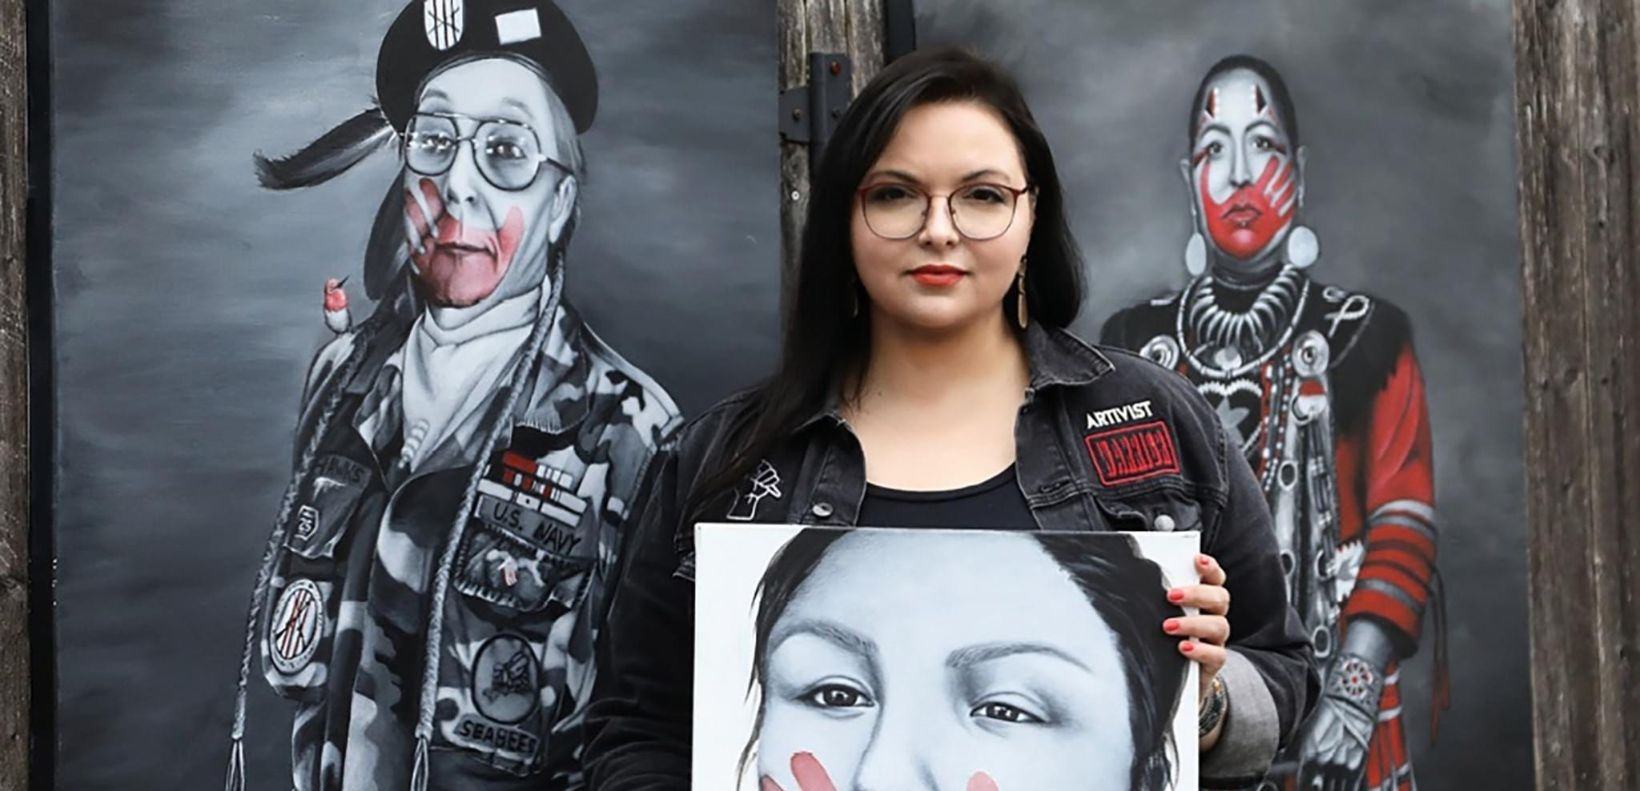 LaFond poses with one of the MMIWG Portraits in Red paintings.